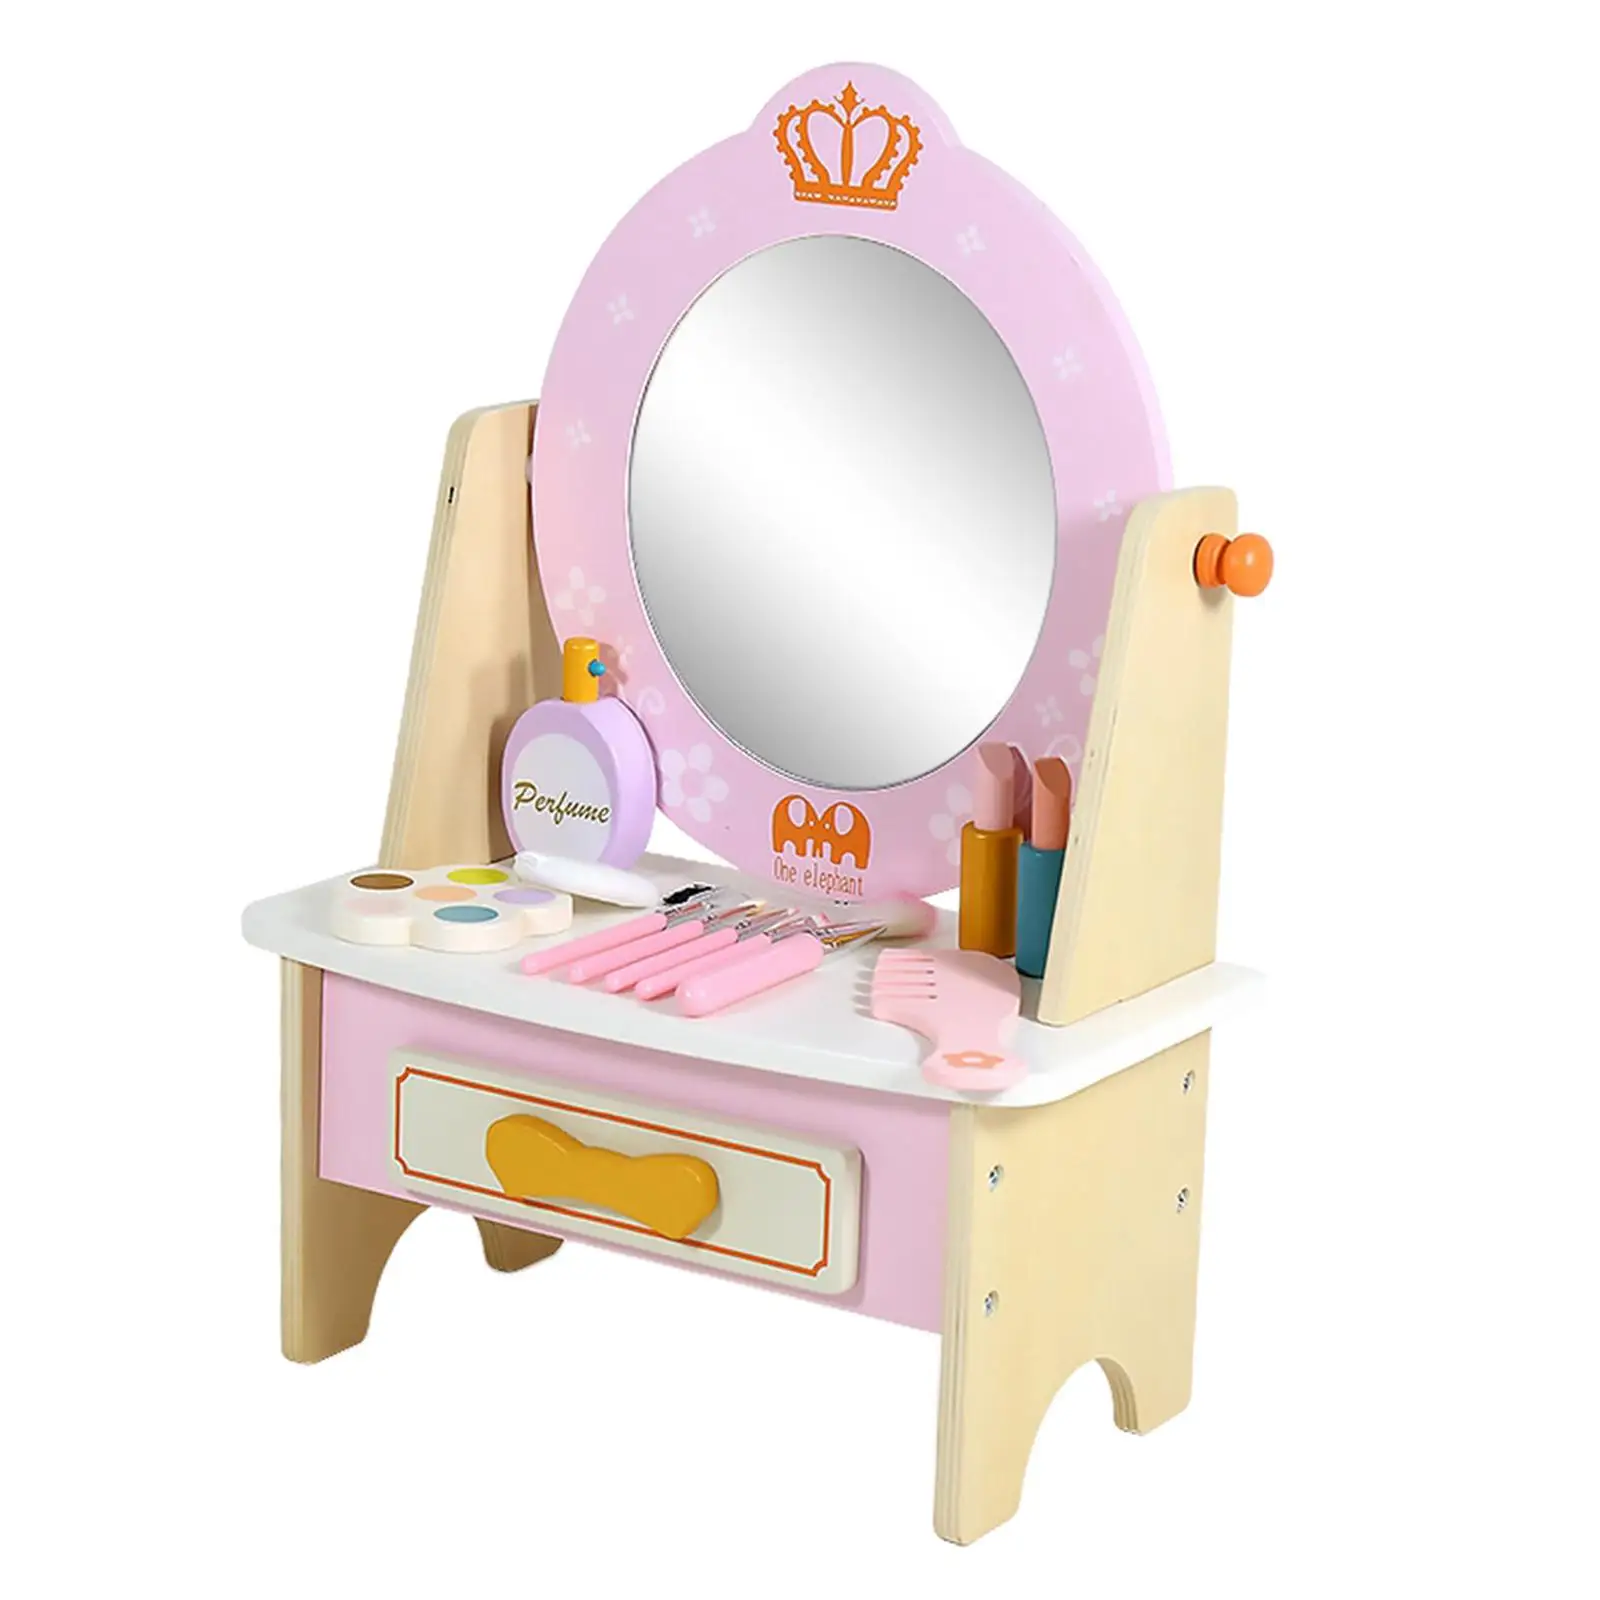 Wooden Dress up Table Toy Educational Toys Role Play for Toddler Birthday Gifts